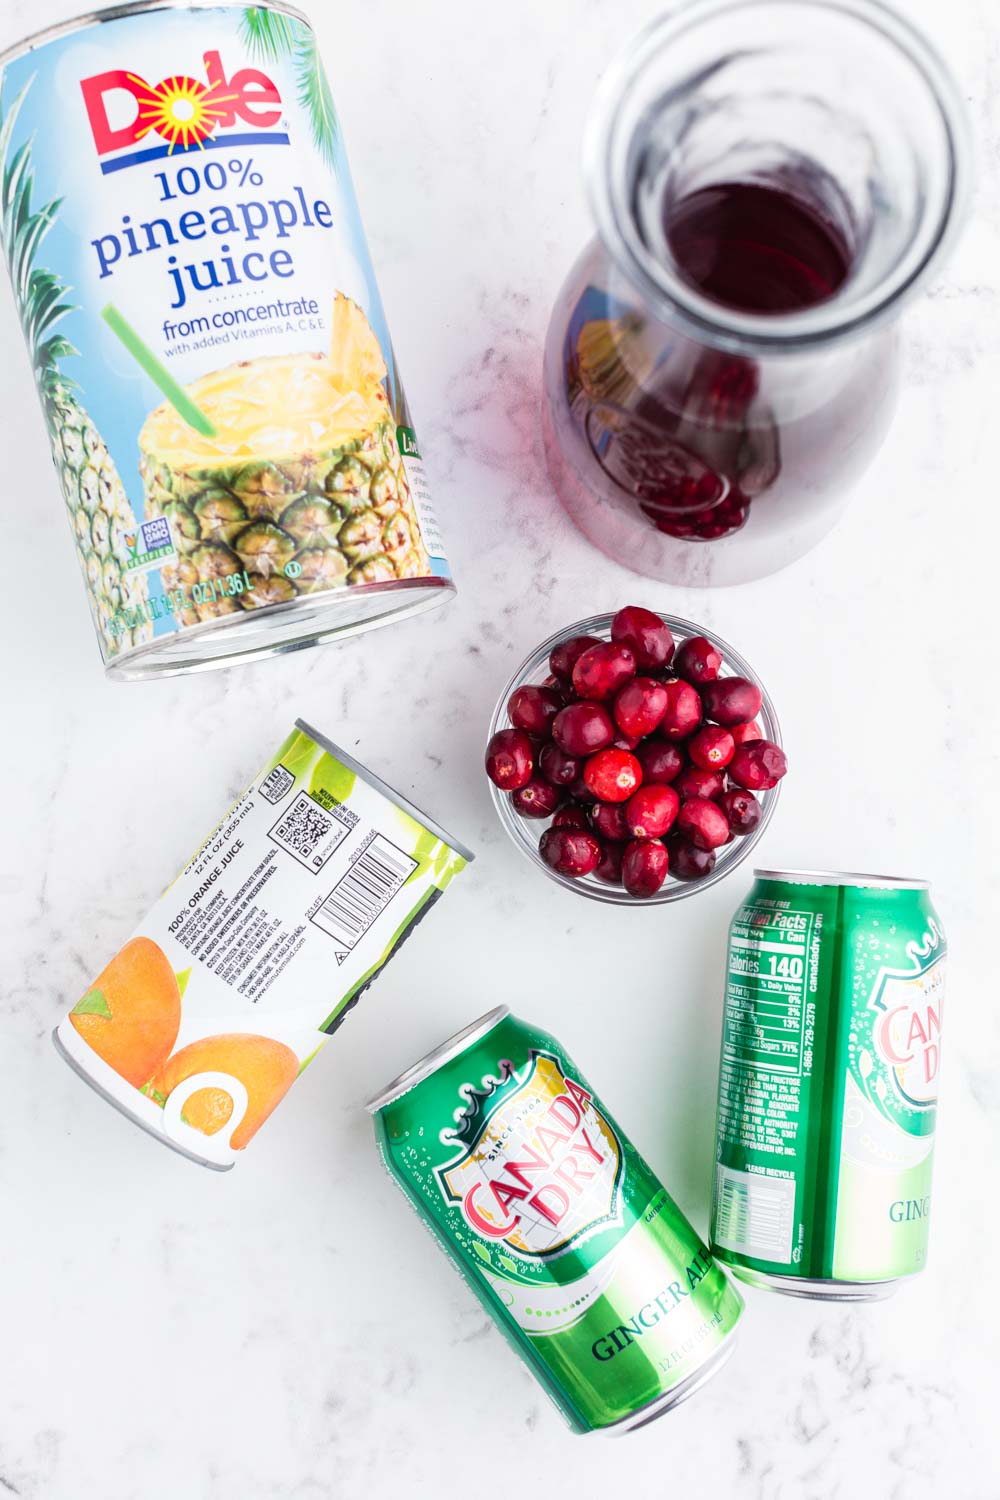 Can of frozen orange juice concentrate, 2 cans of ginger ale, bowl with cranberries, pitcher with cranberry juice, can of pineapple juice, on marble countertop.